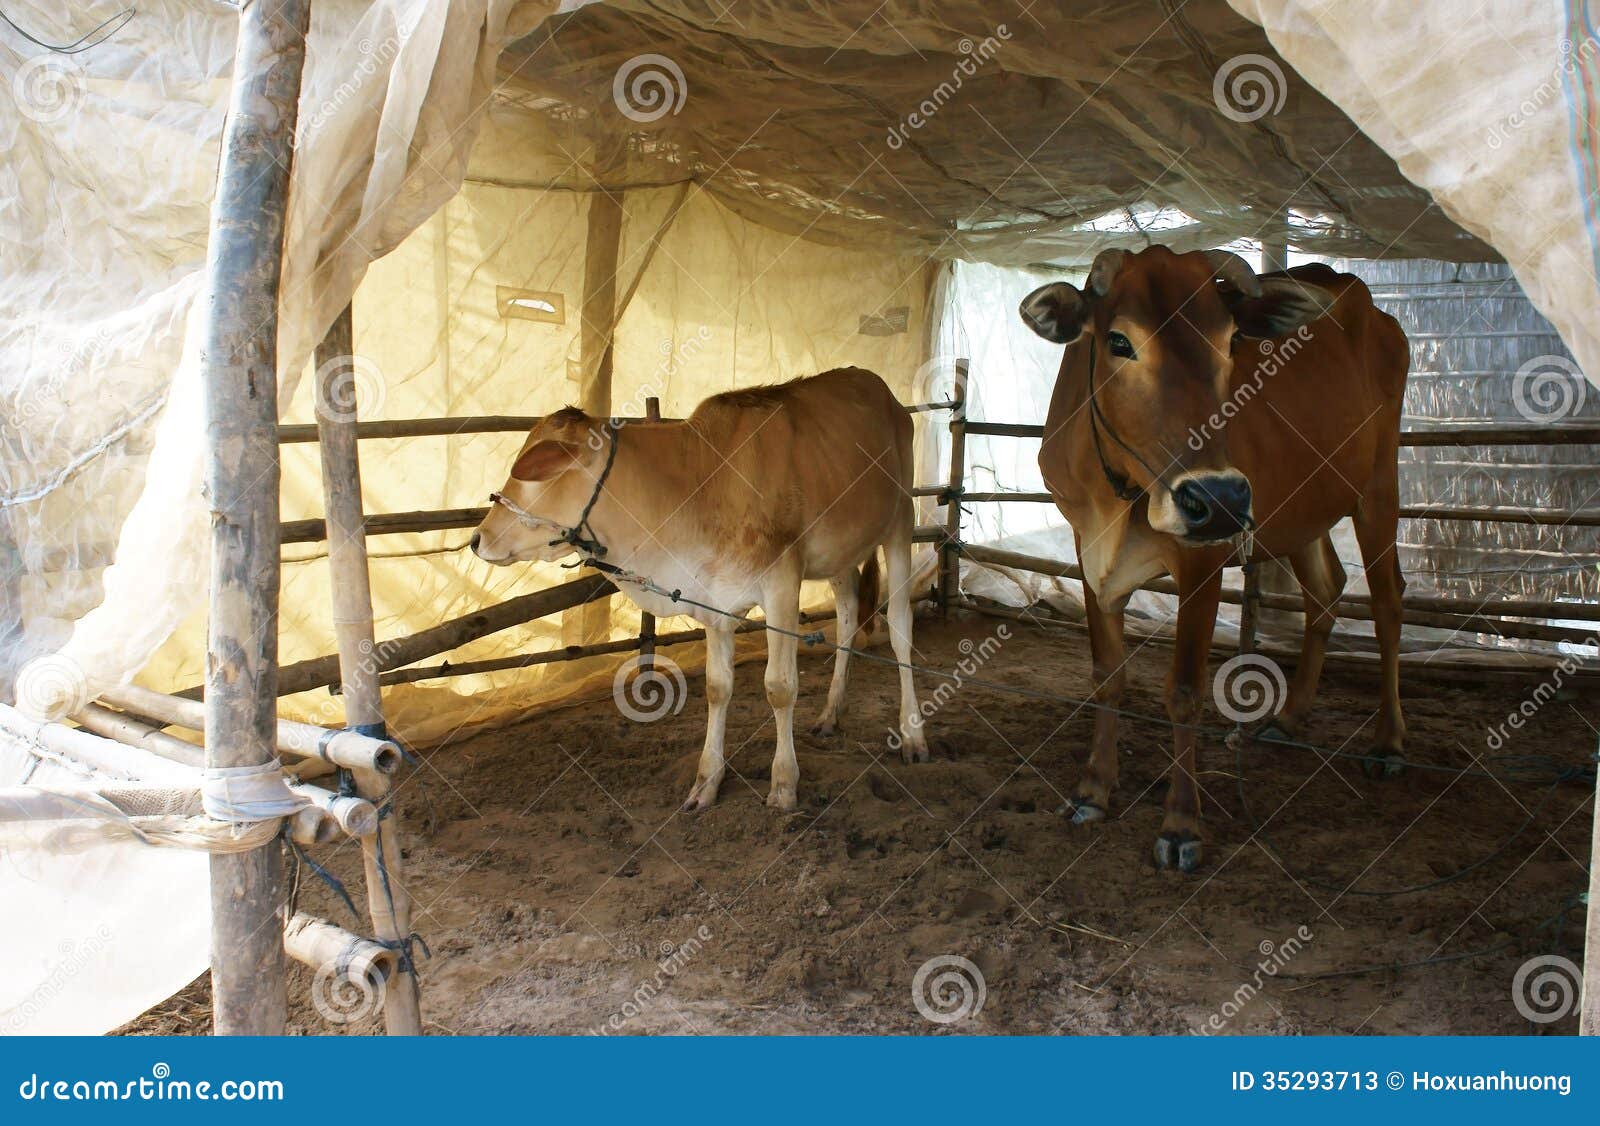 Cowshed with mosquito net stock image. Image of looking ...